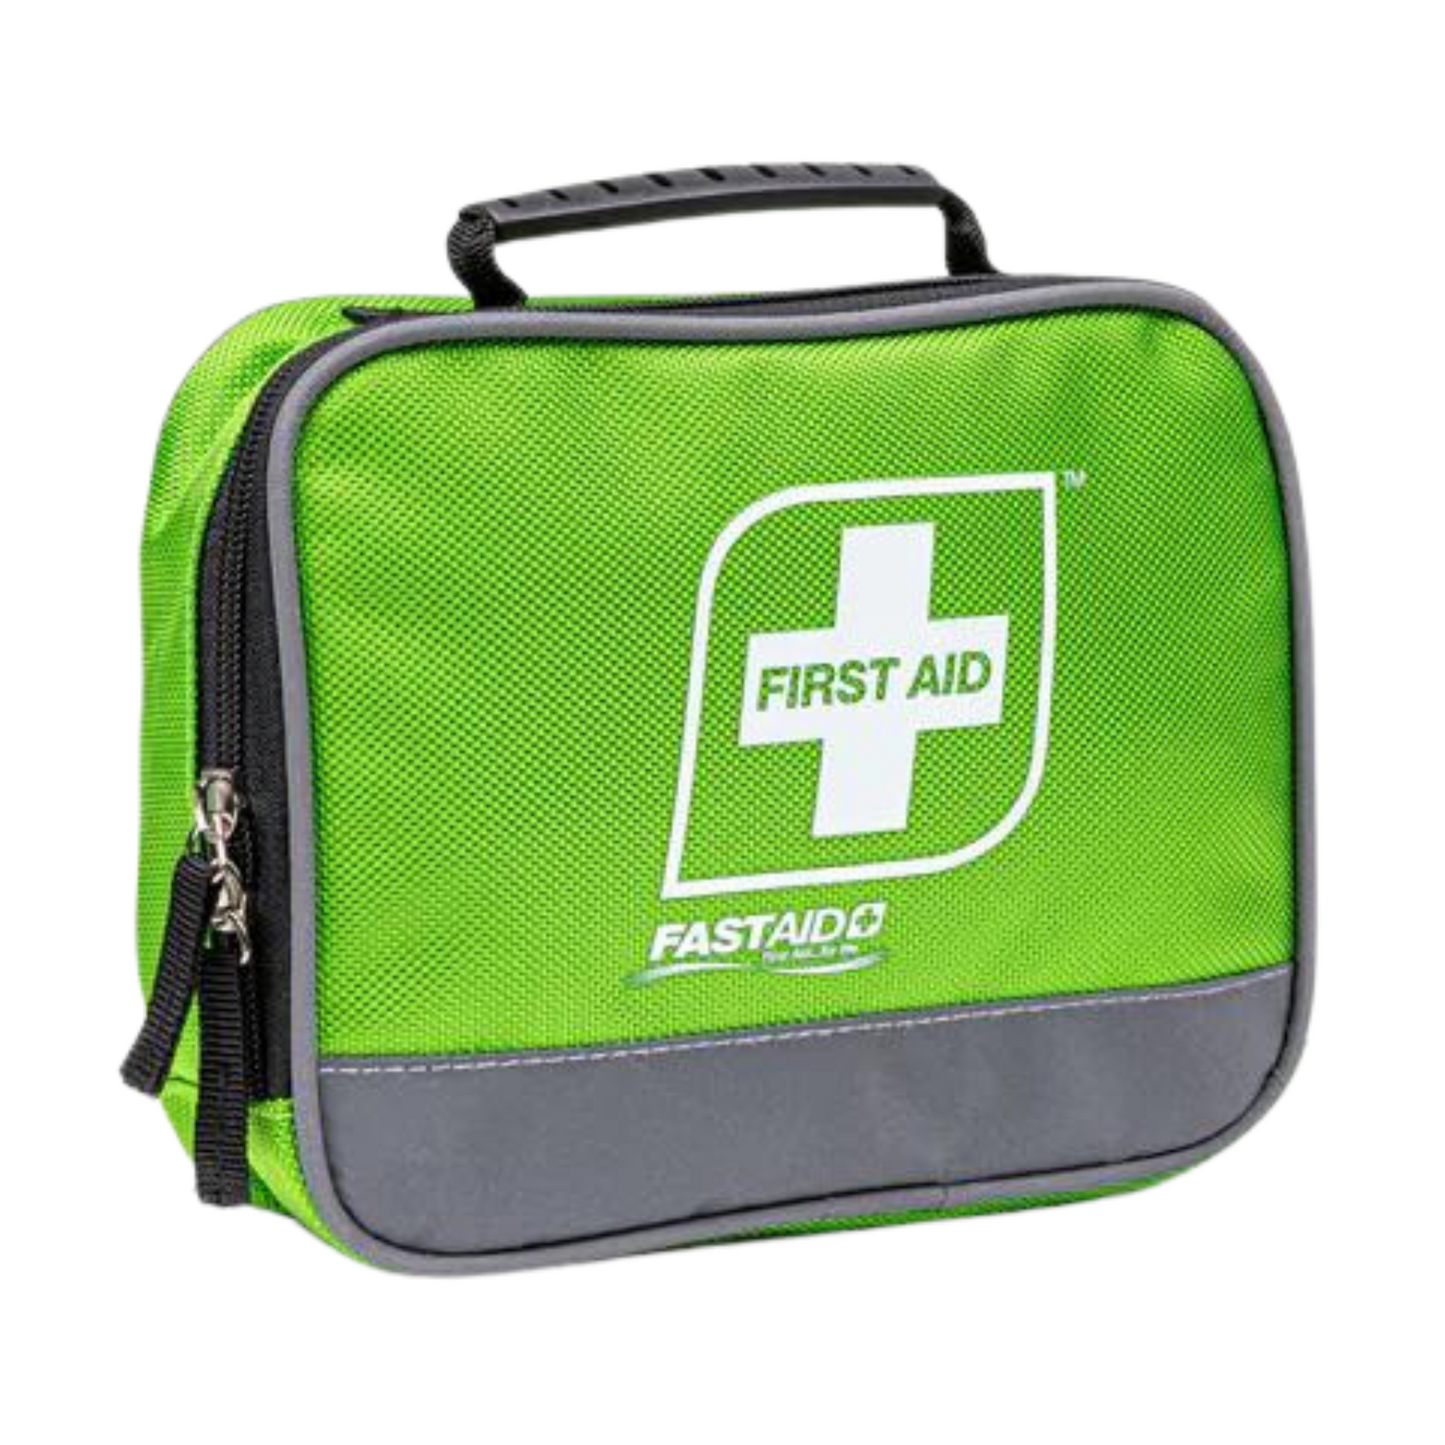 Fast Aid, First Aid Kit - (1 pack)